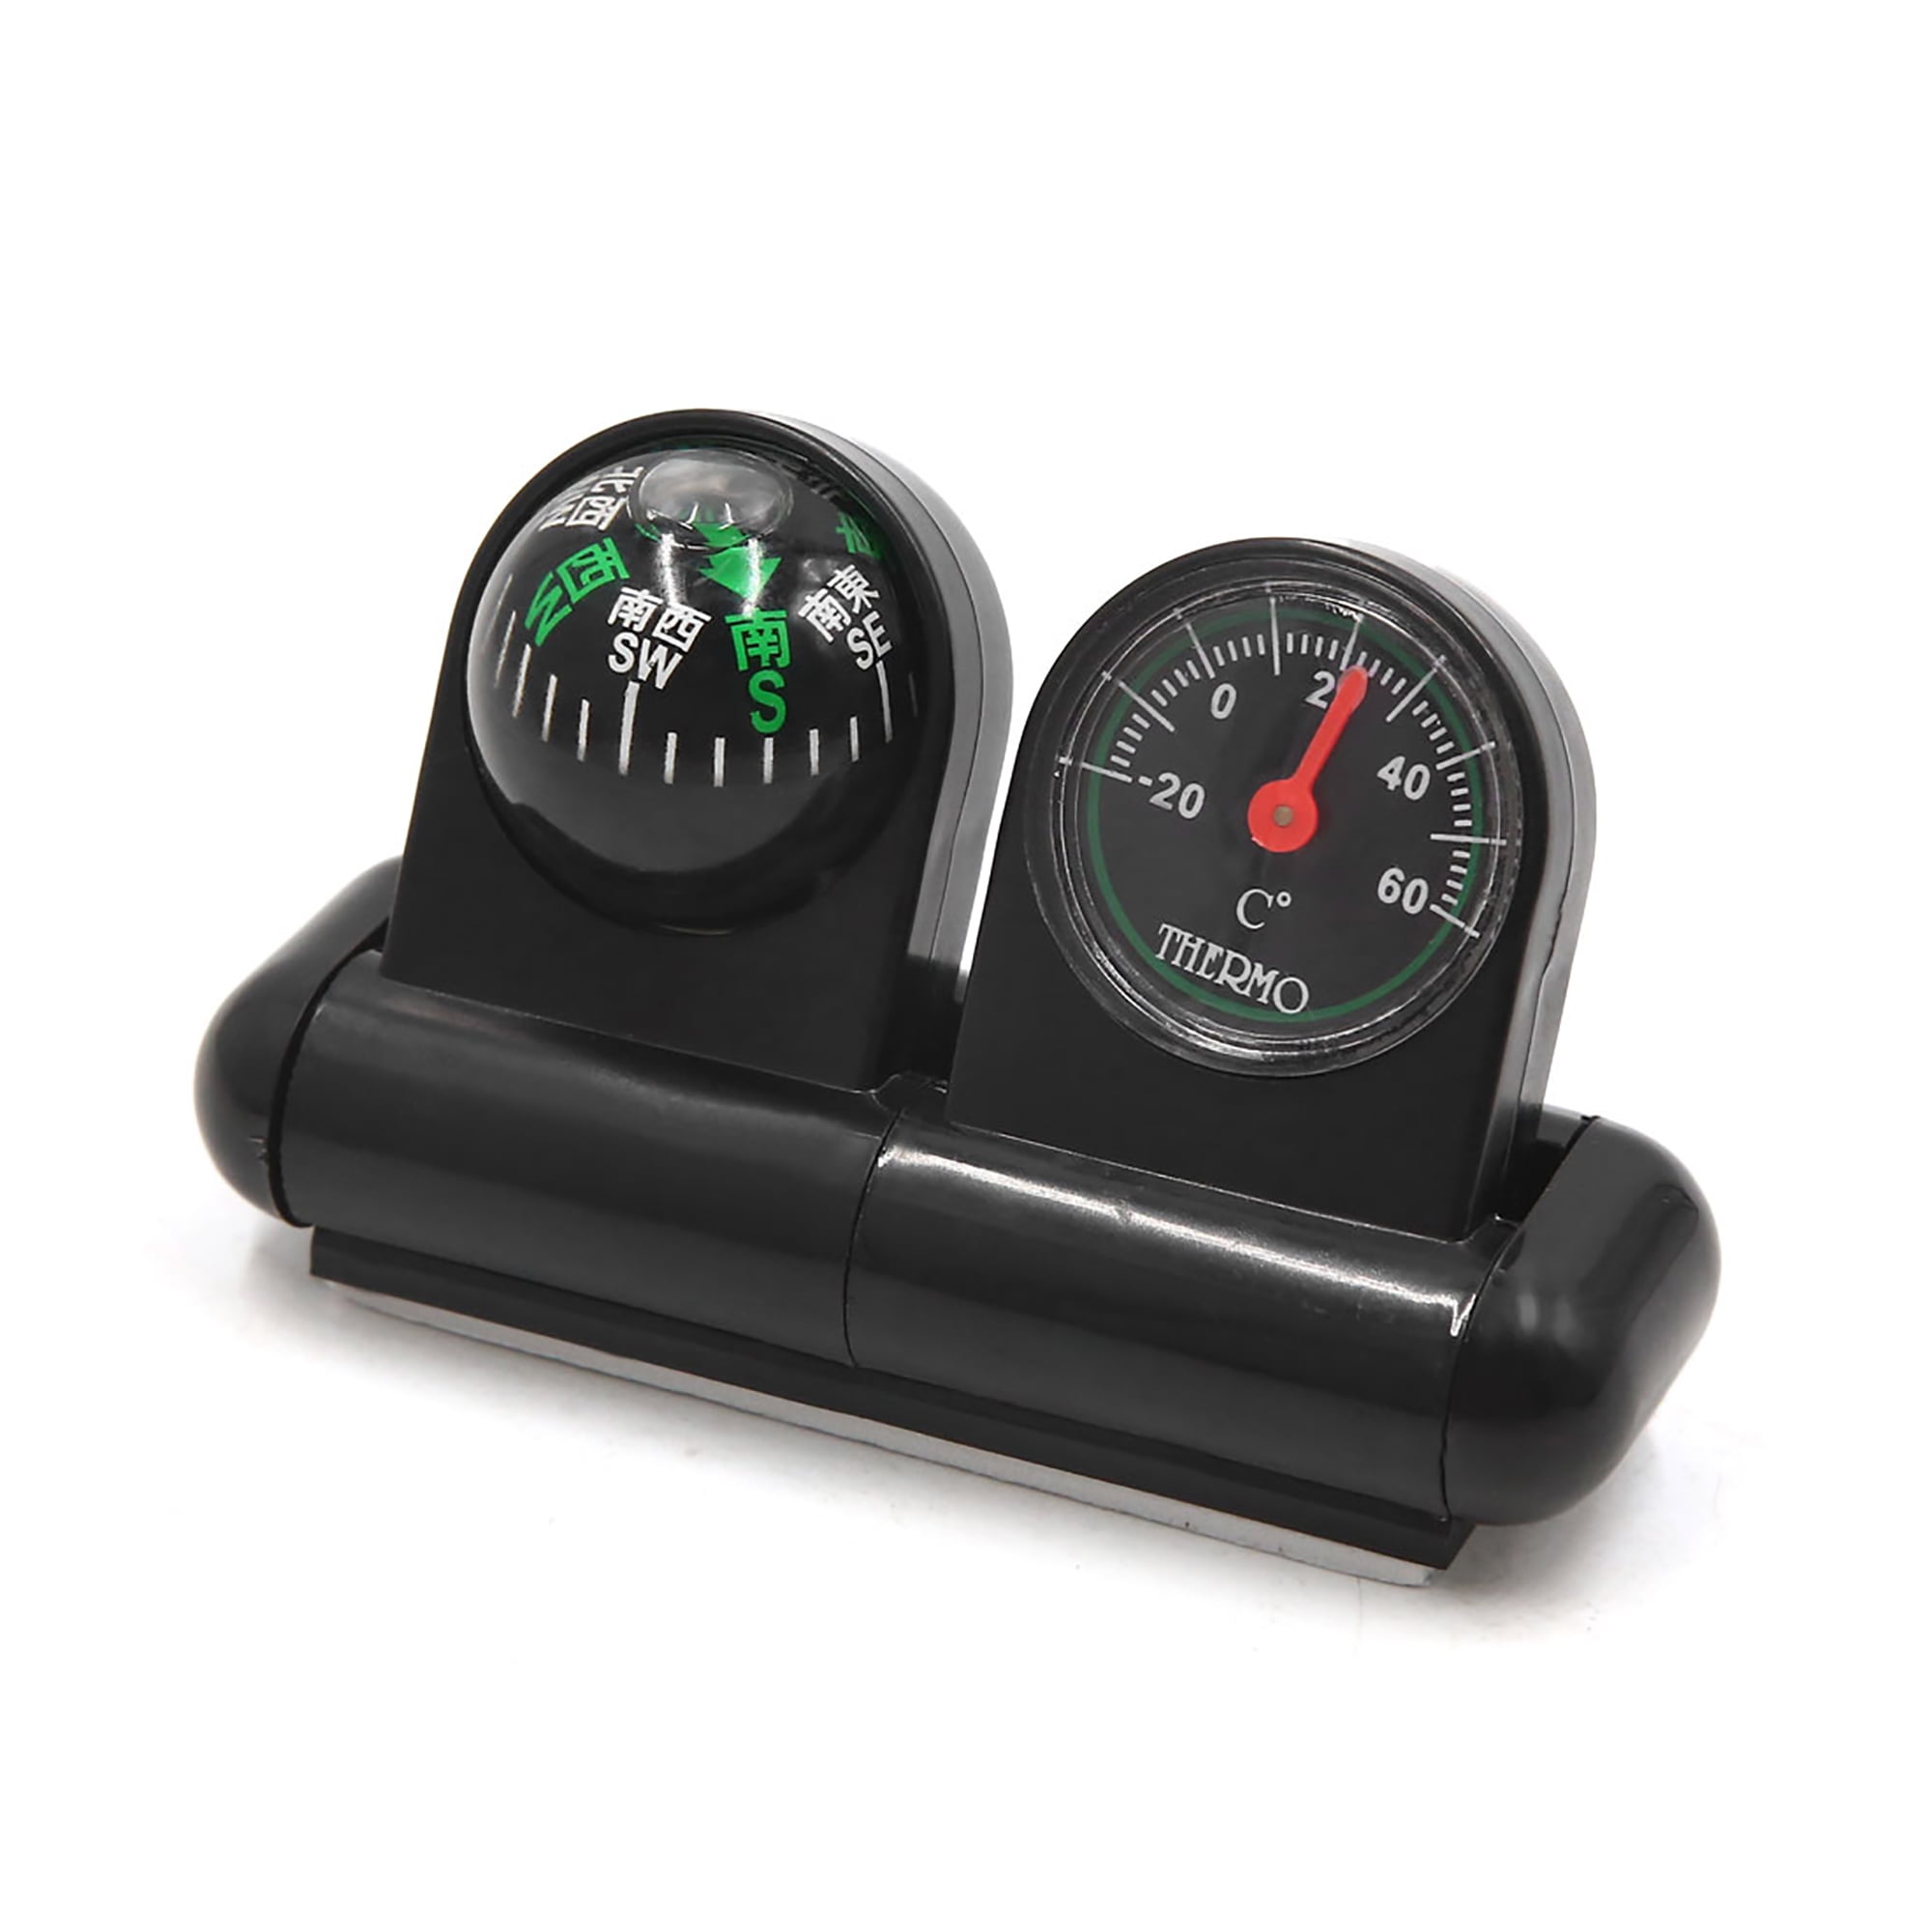 Black Plastic Compass Thermometer Ball Dashboard Navigation for Car Vehicle